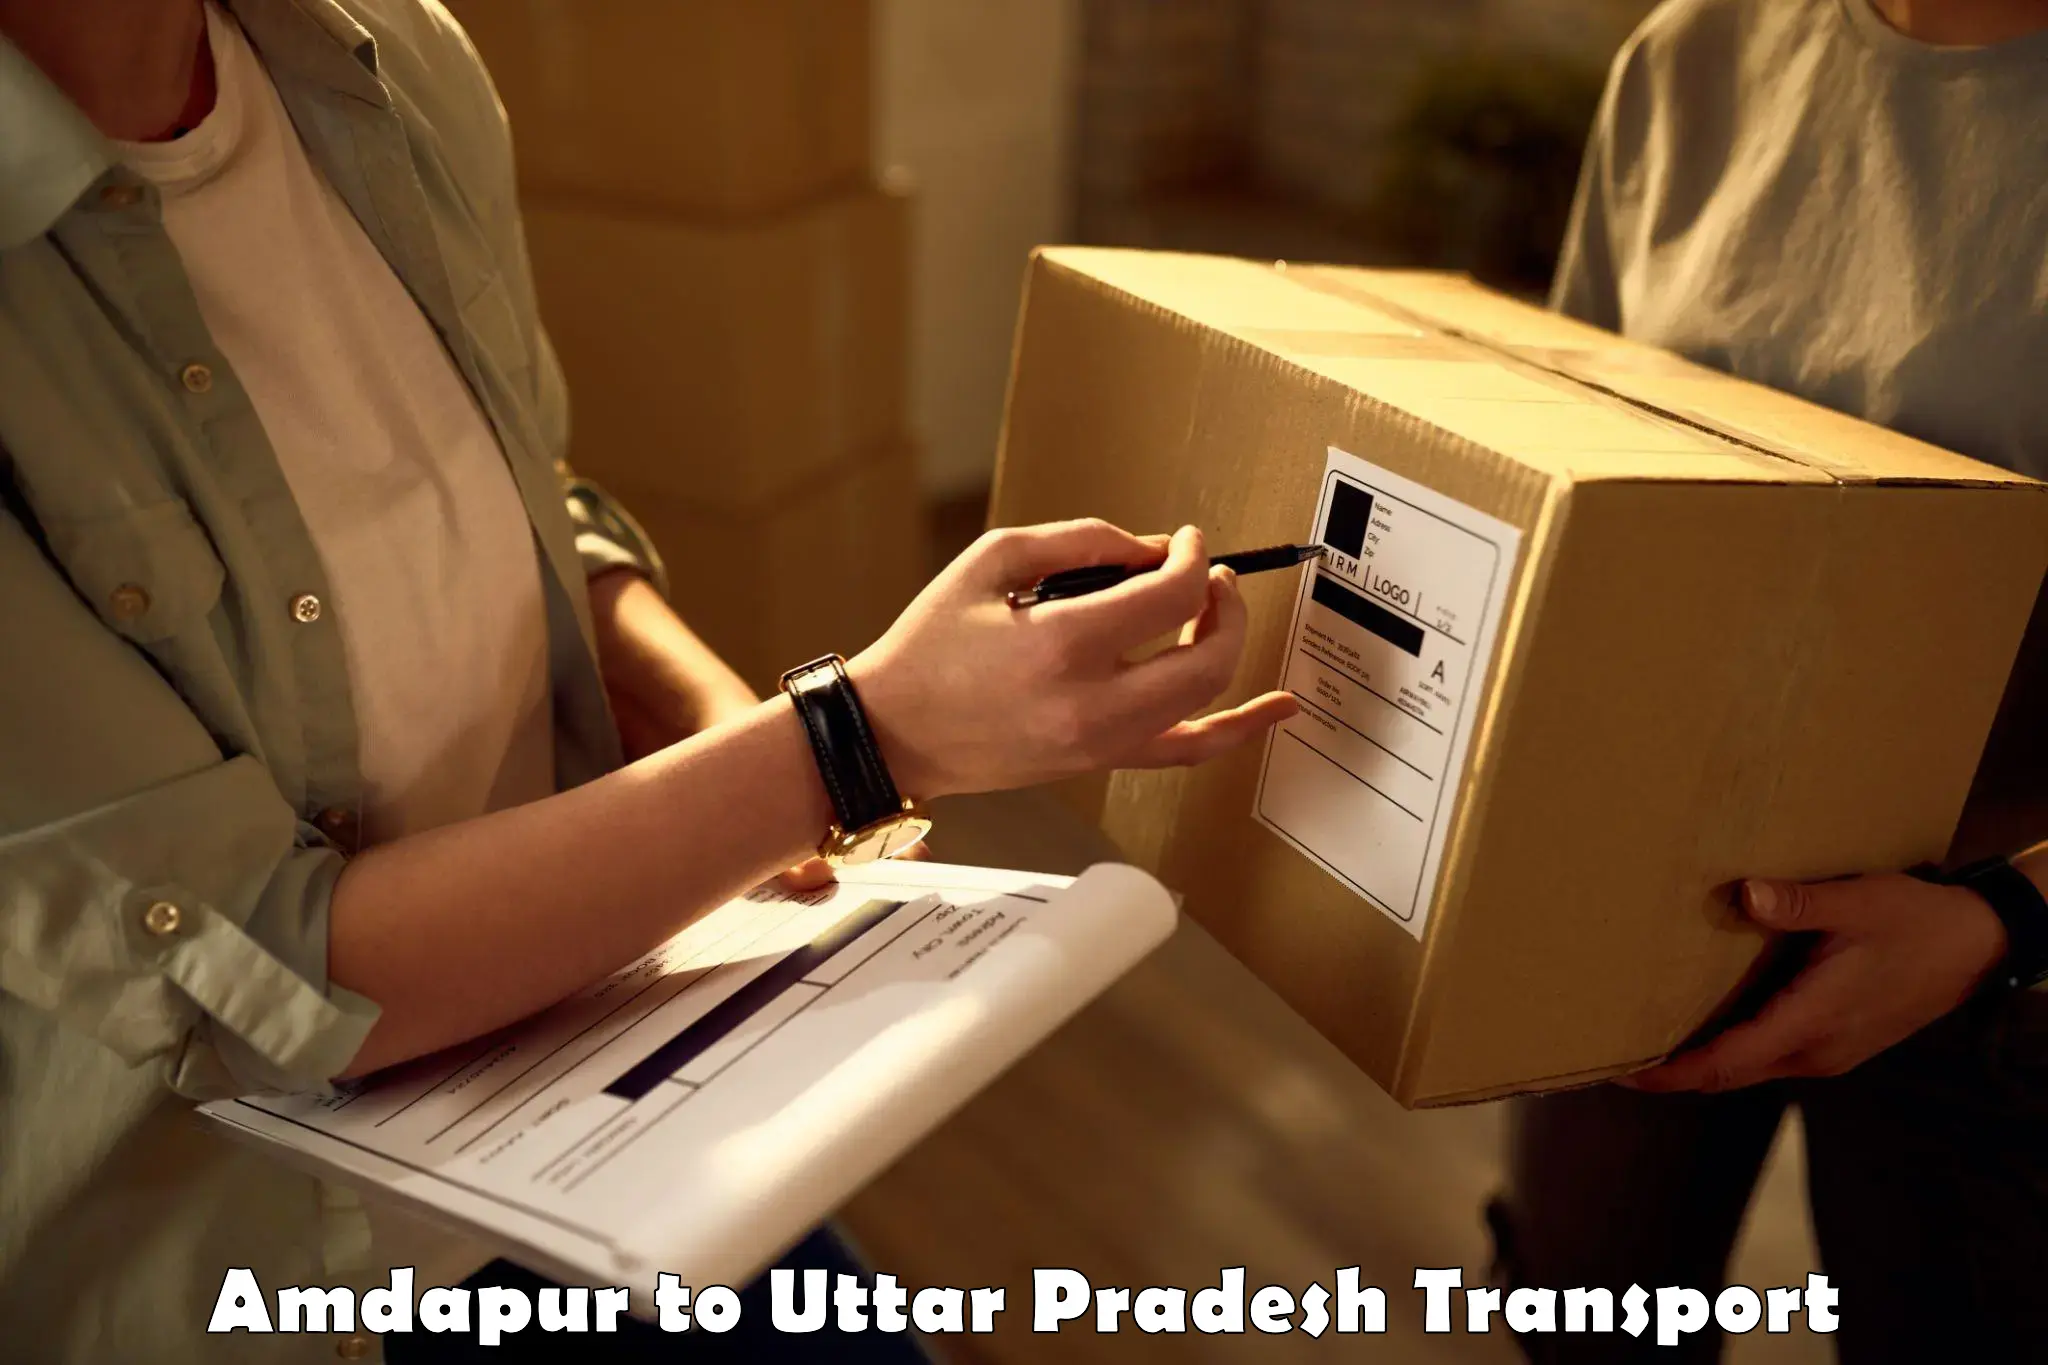 Daily parcel service transport Amdapur to Jhansi